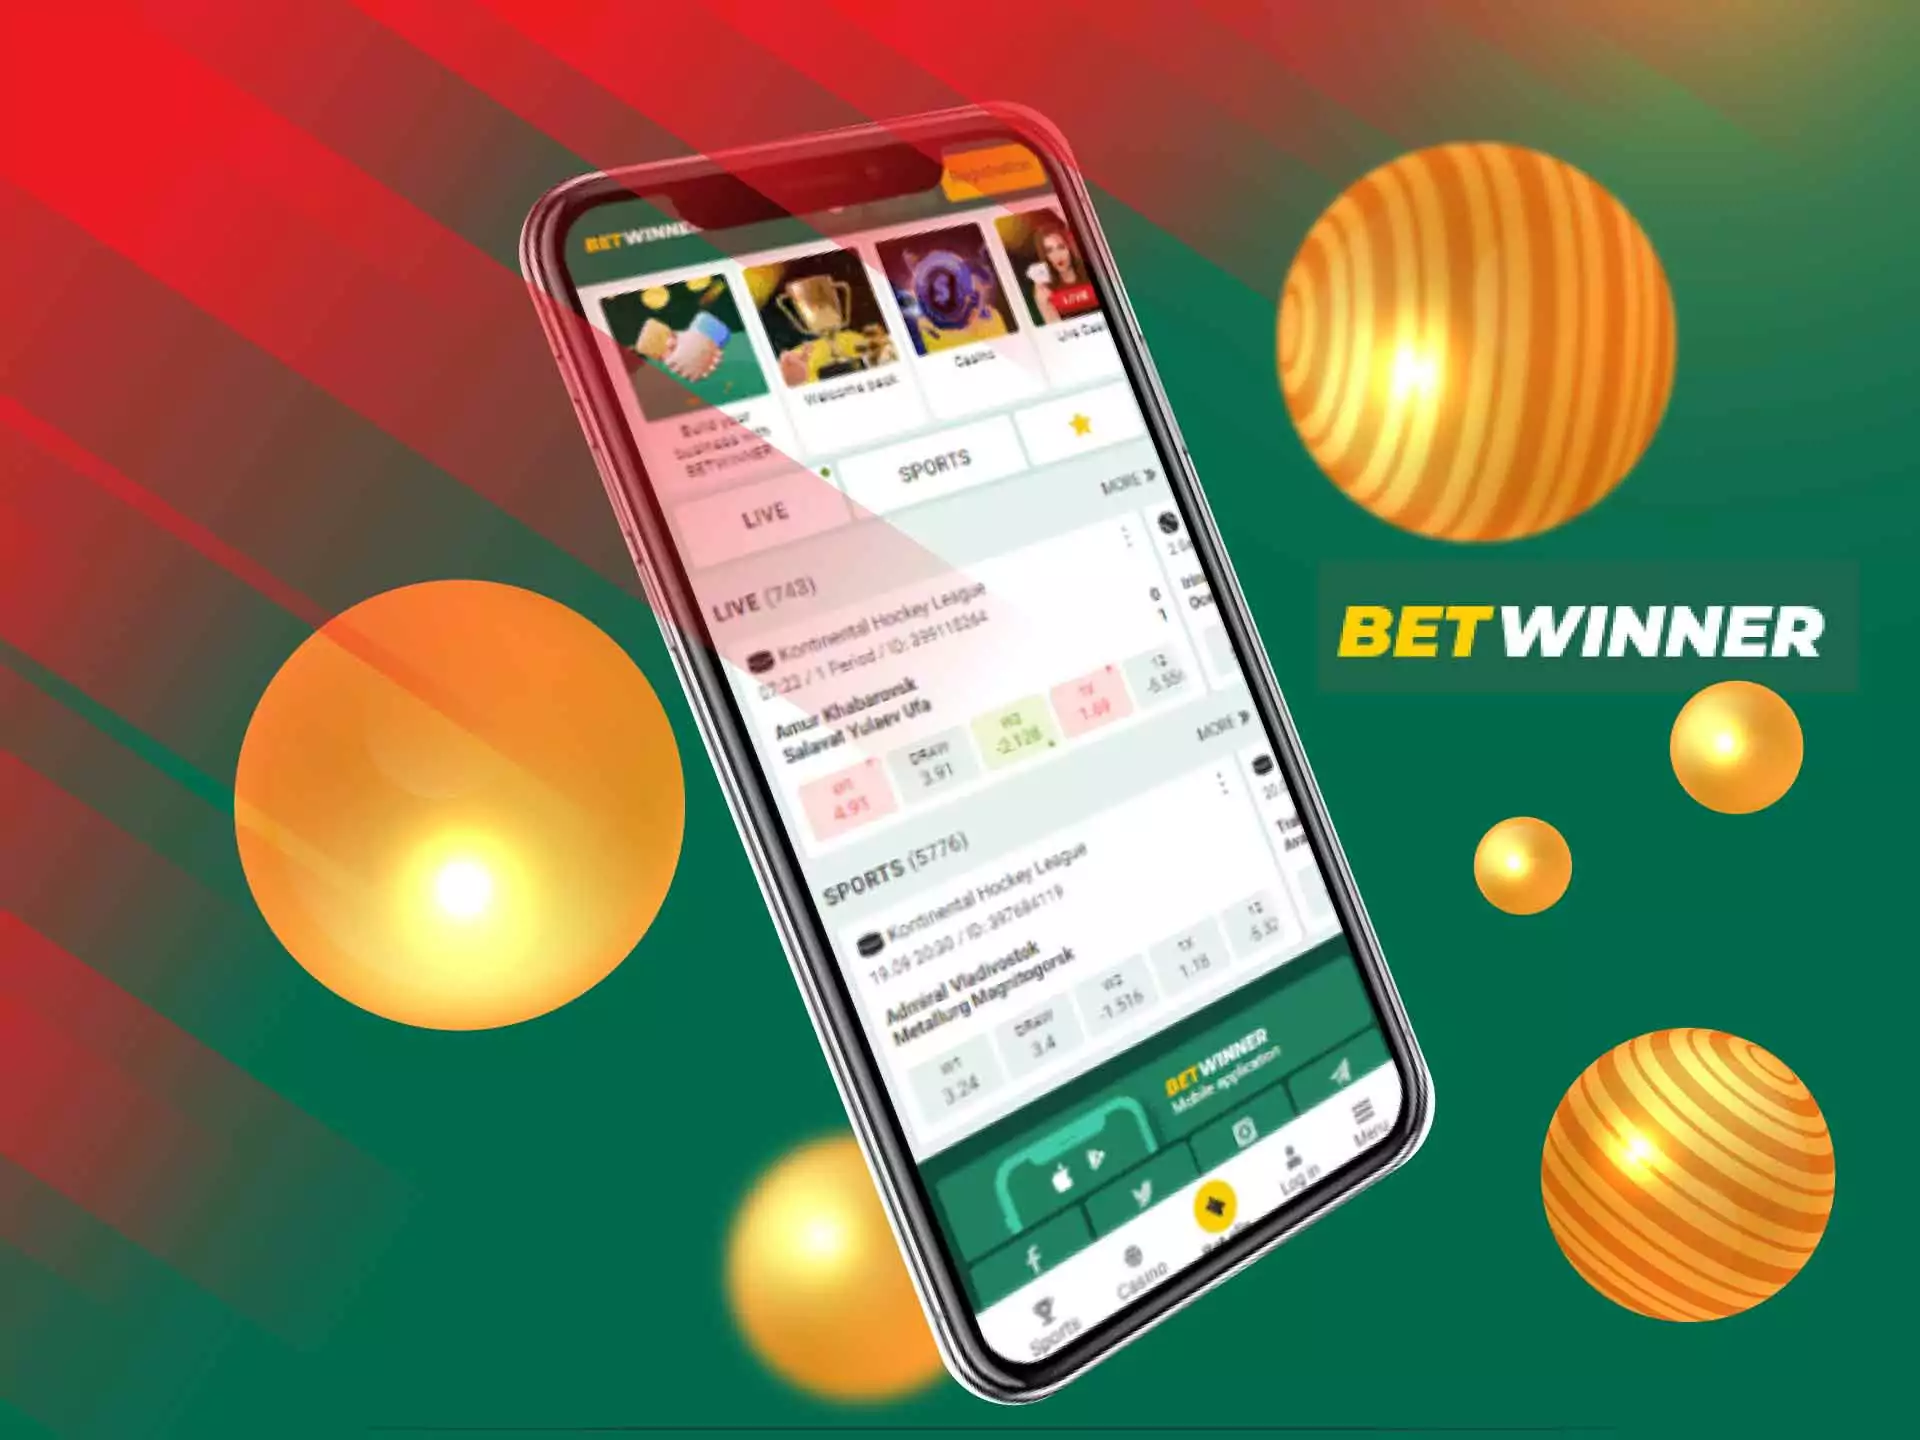 Use the Betwinner mobile version if you don't want to download the soft.